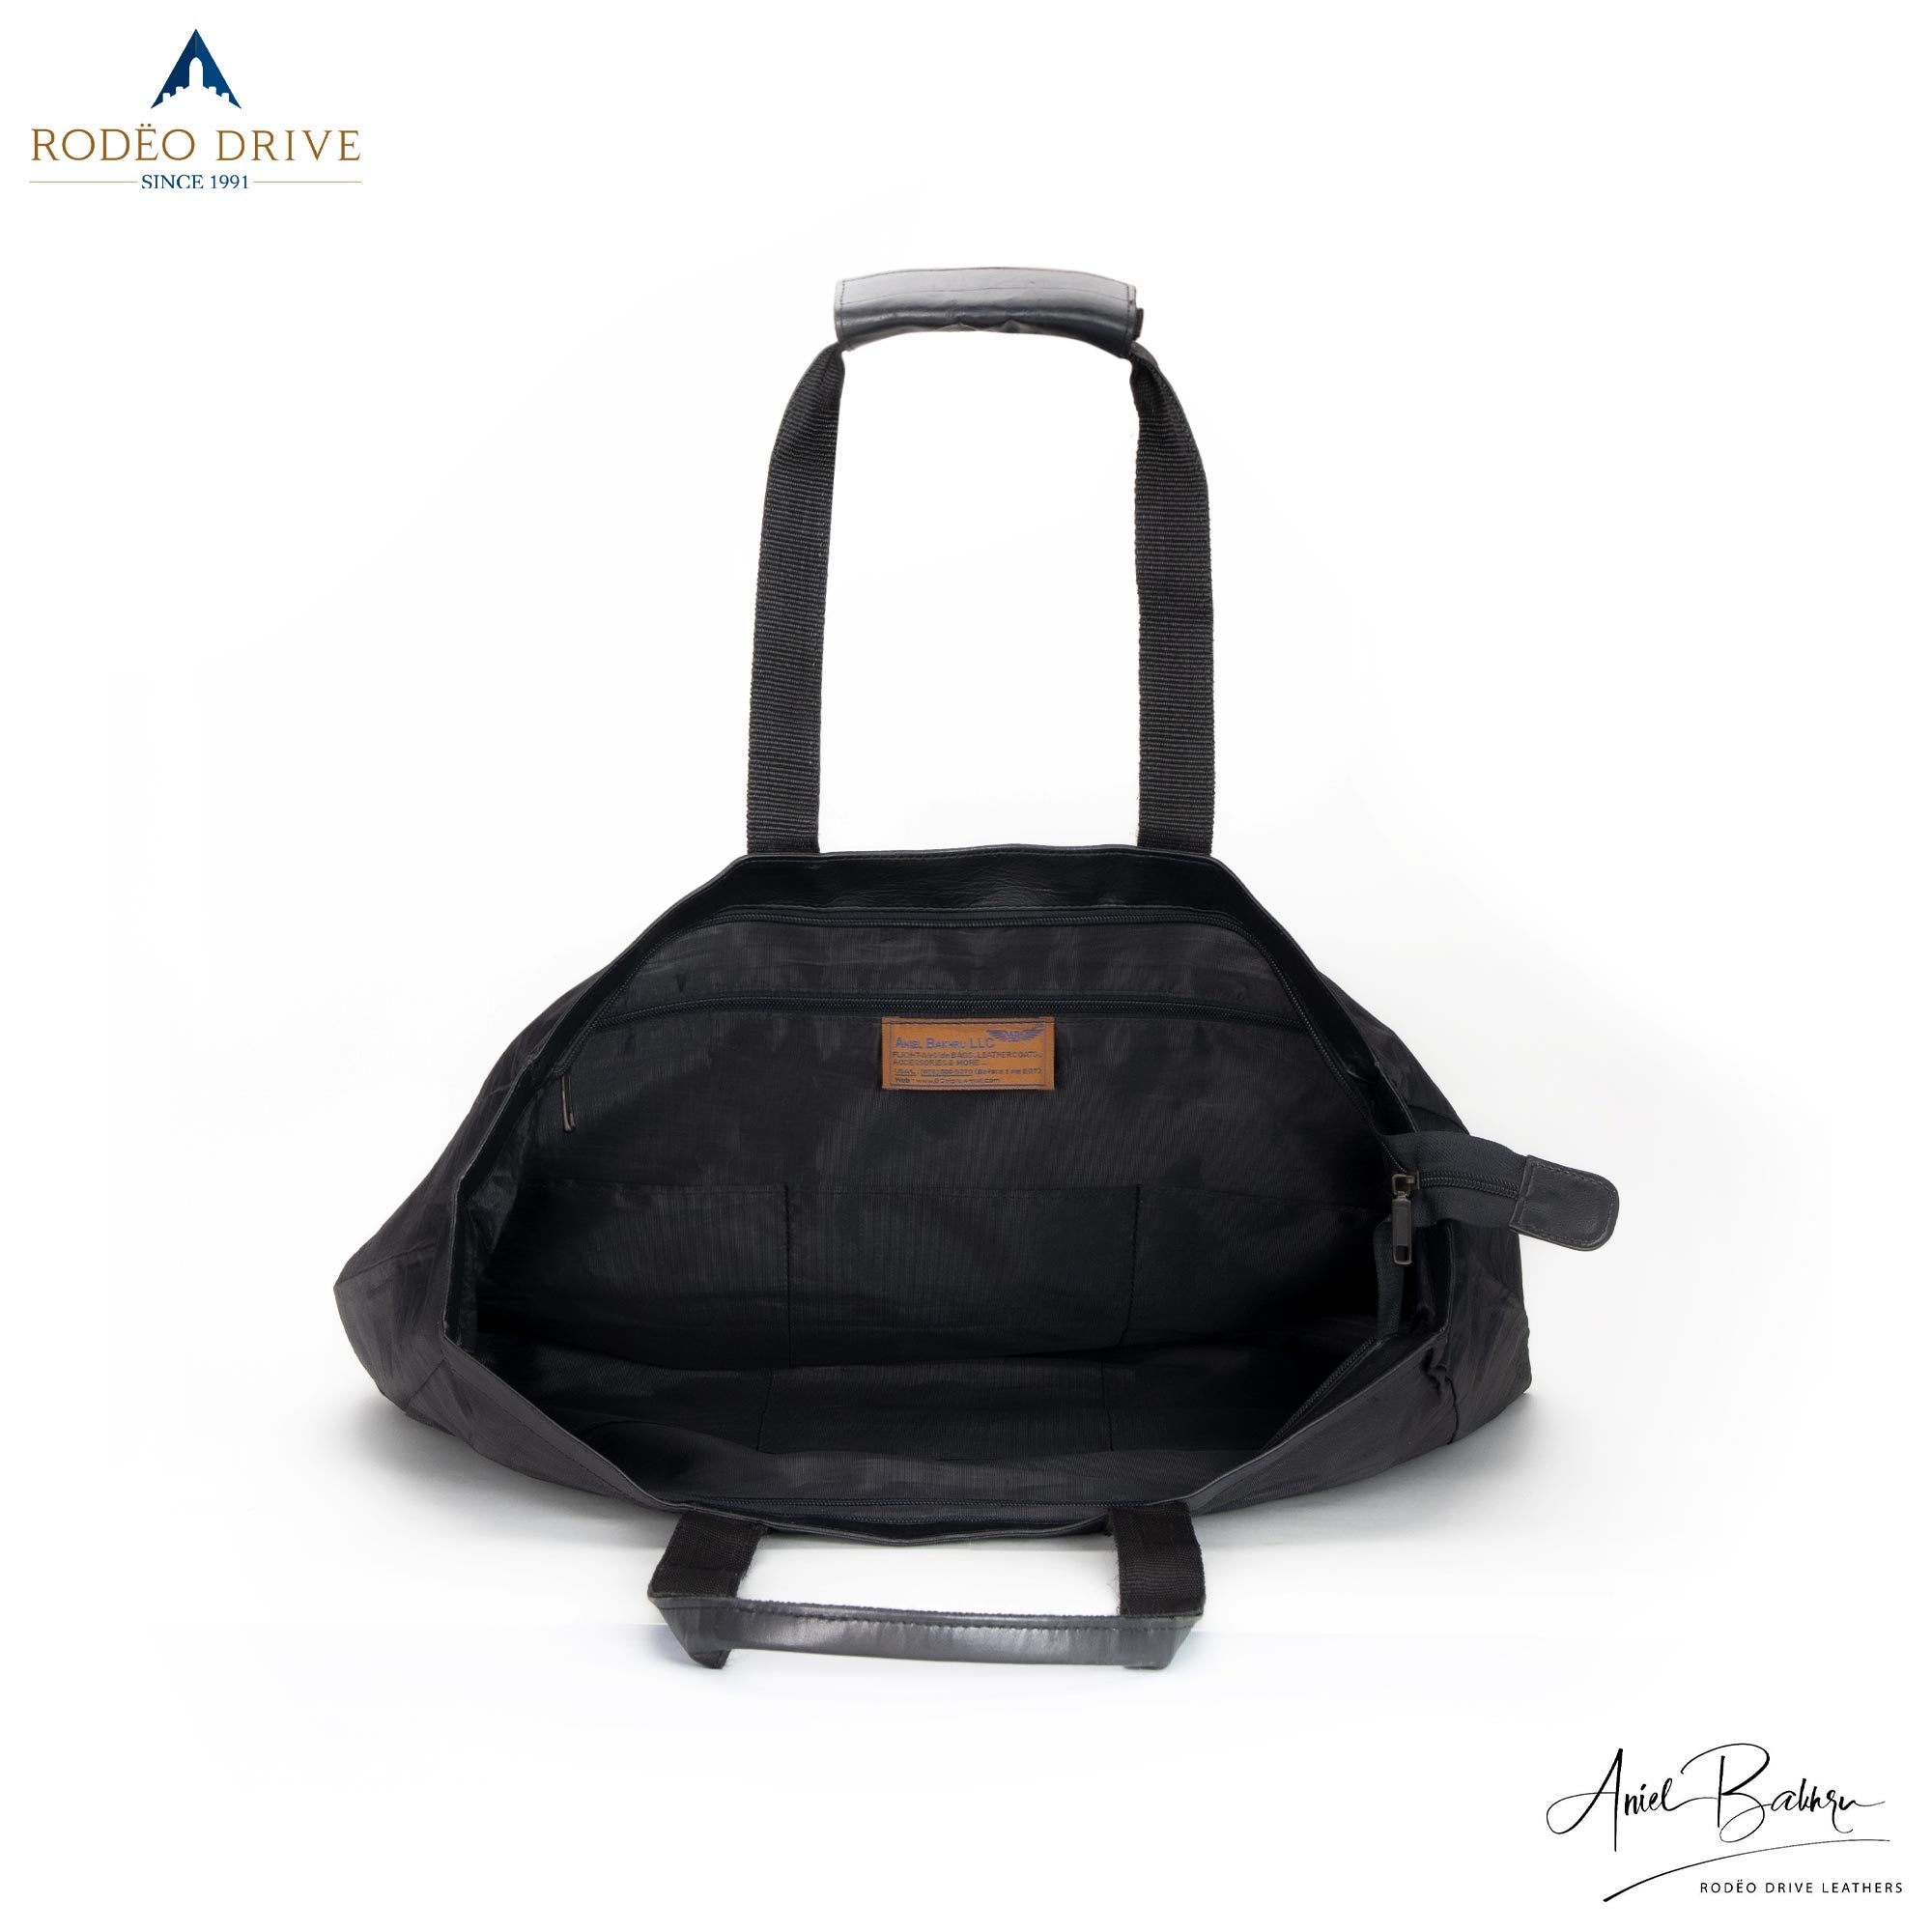 Open inside image of black KELLY LEATHER CORDURA SHOPPING BAG. It is spacious.